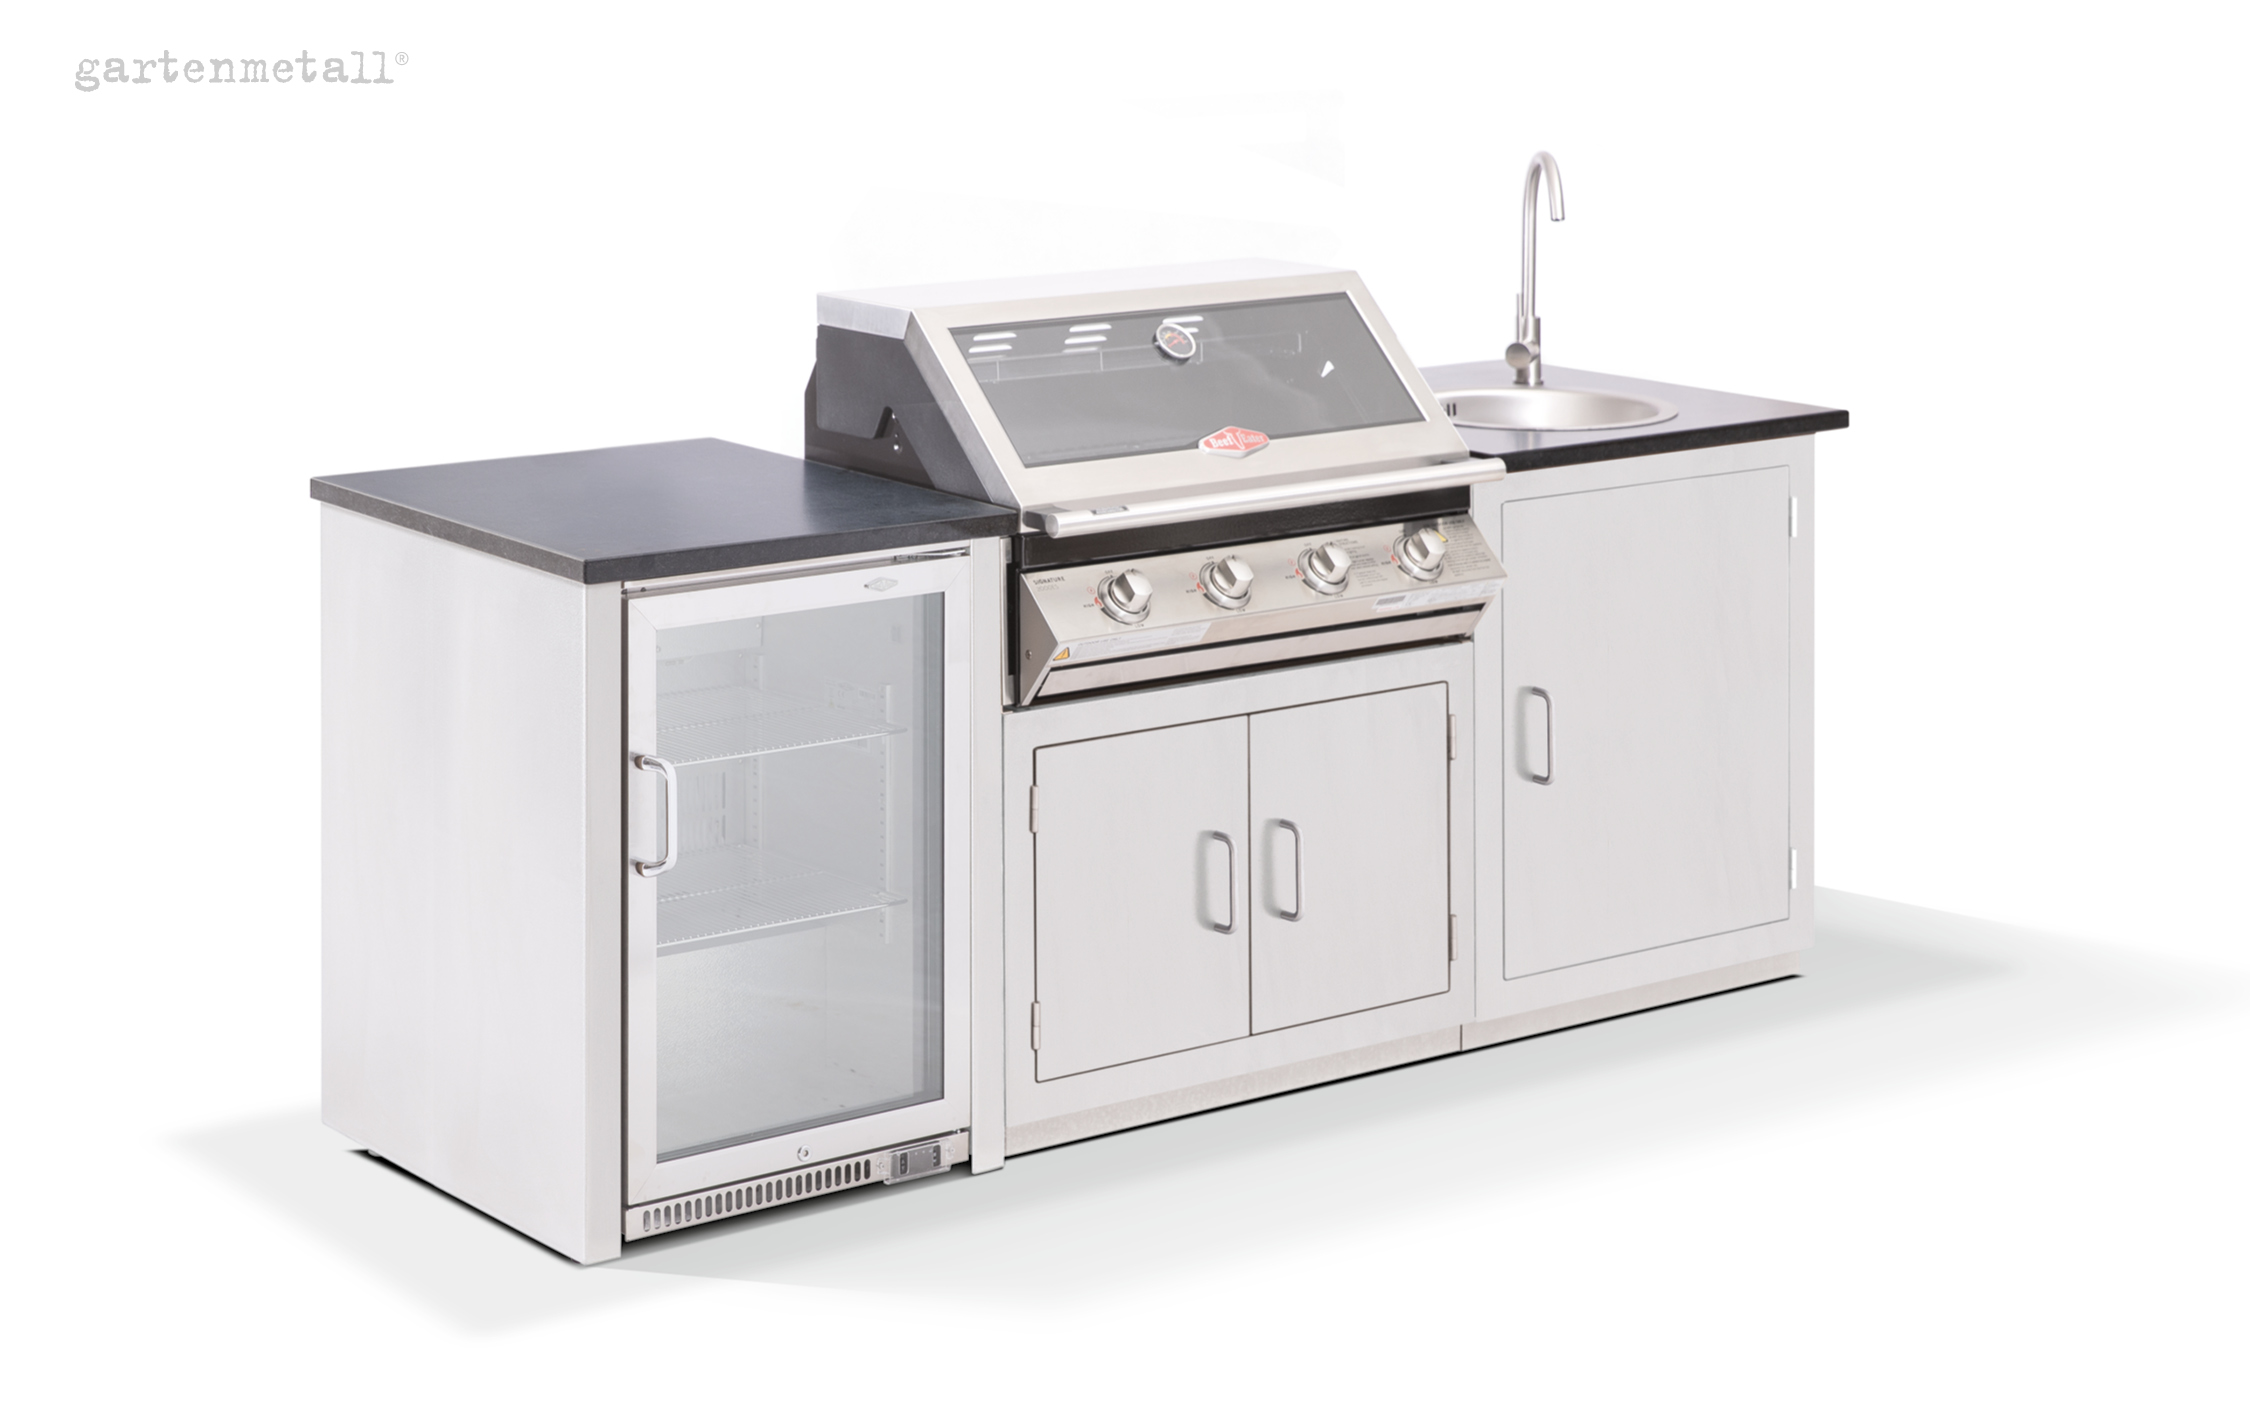 Complete Package Garden Kitchen IBIZA - Compact